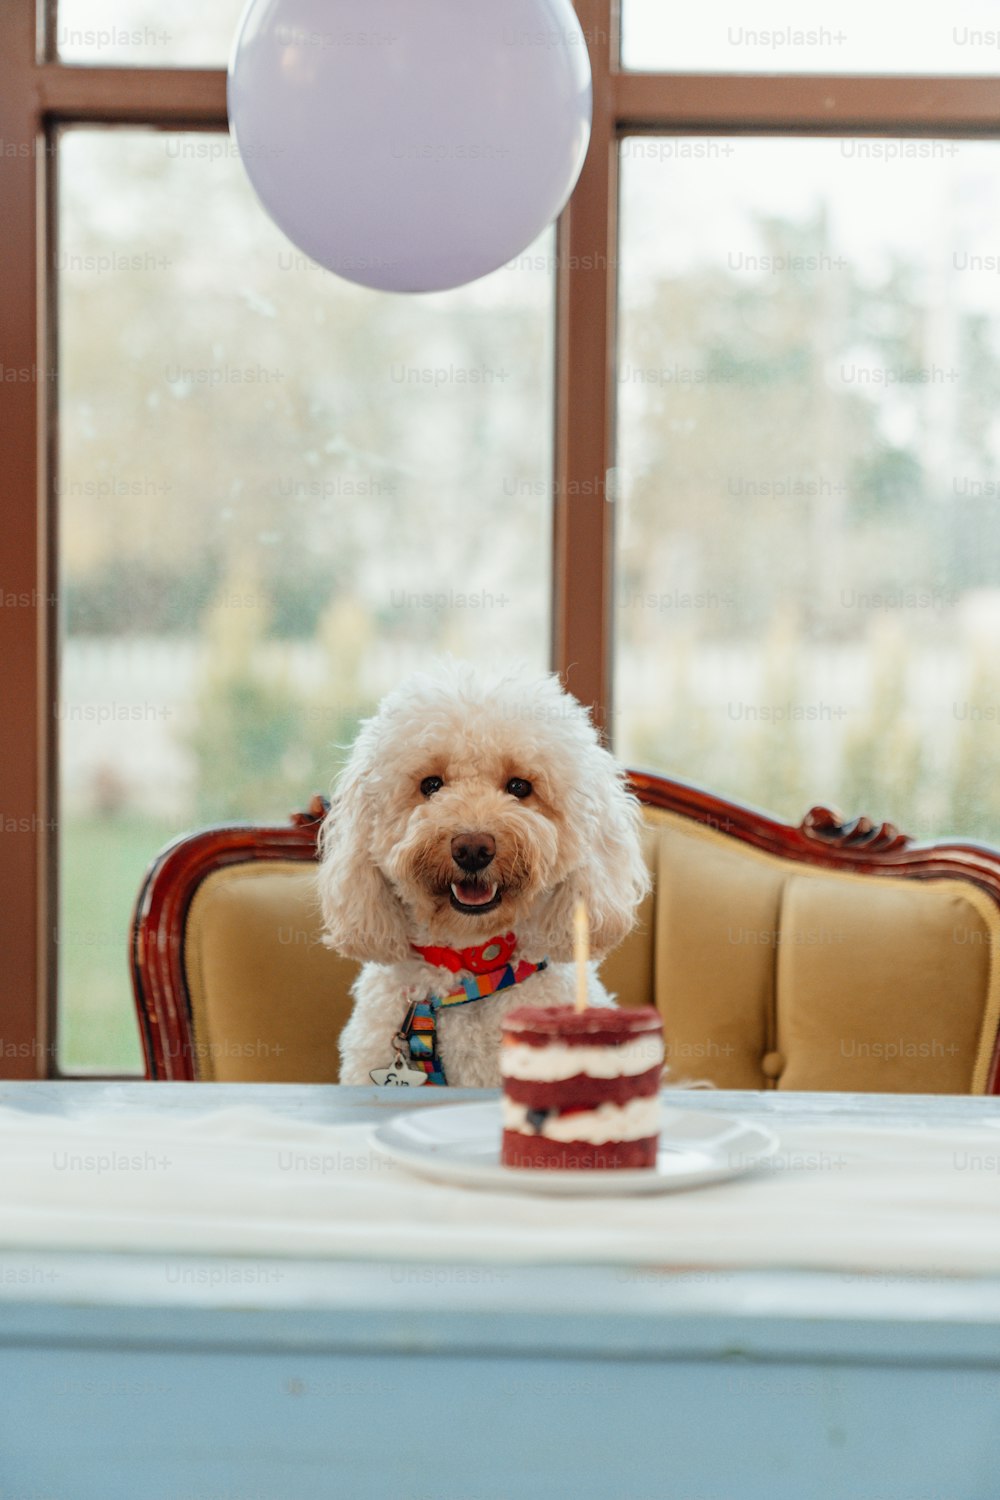 a dog sitting at a table with a piece of cake